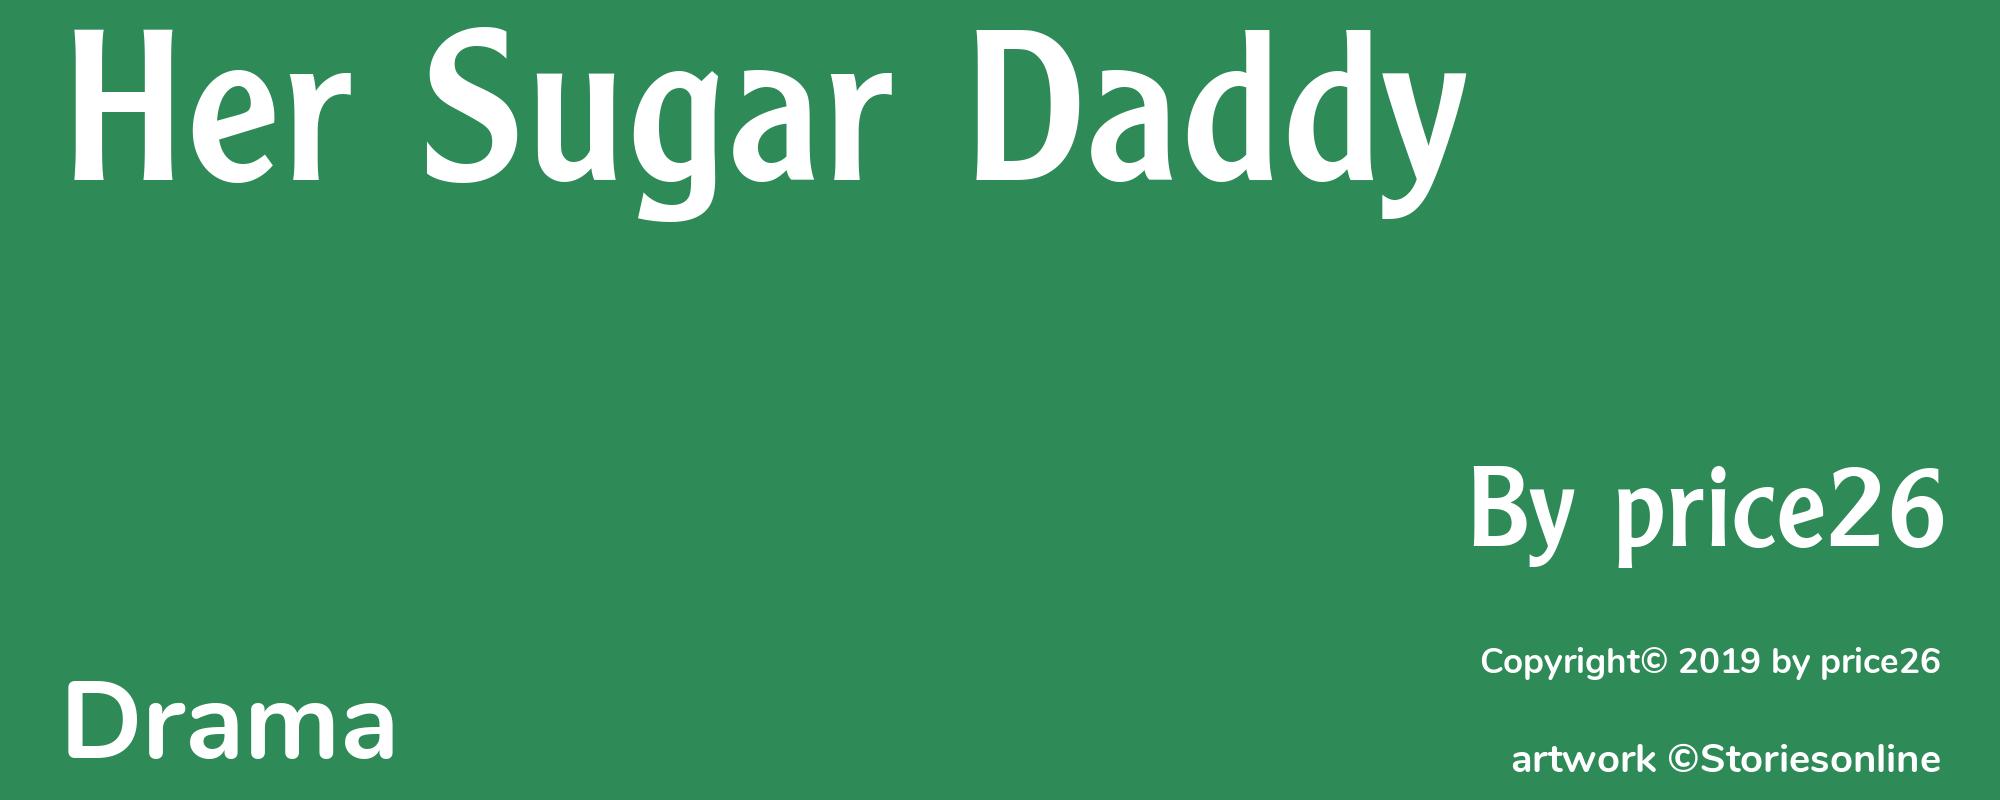 Her Sugar Daddy - Cover